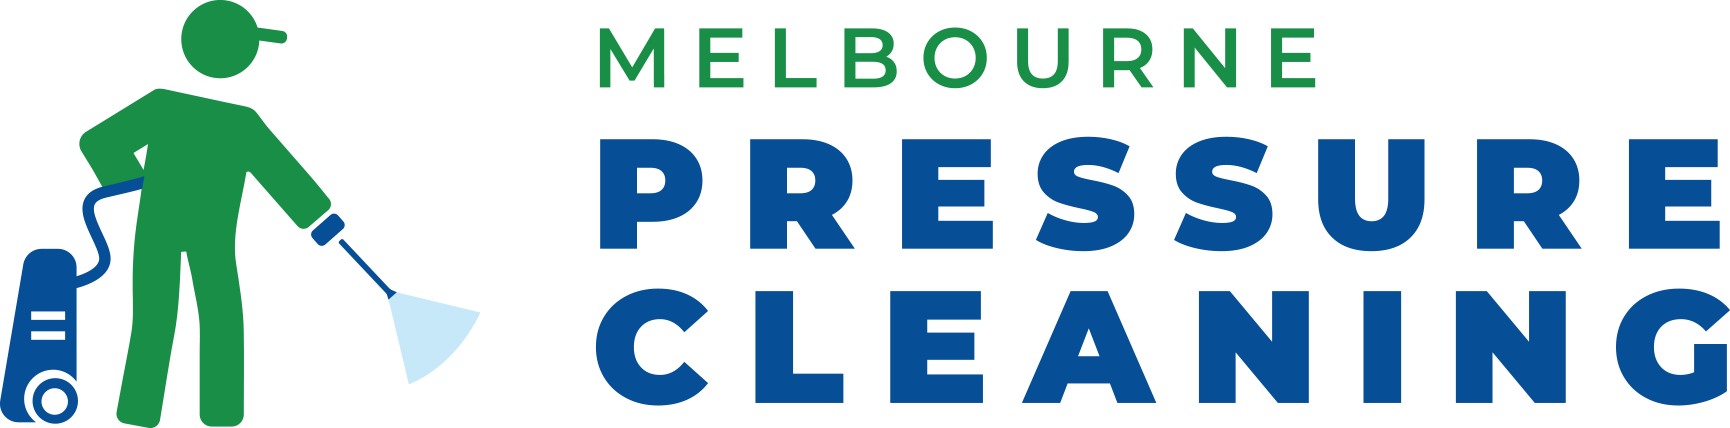 Melbourne Pressure Cleaning